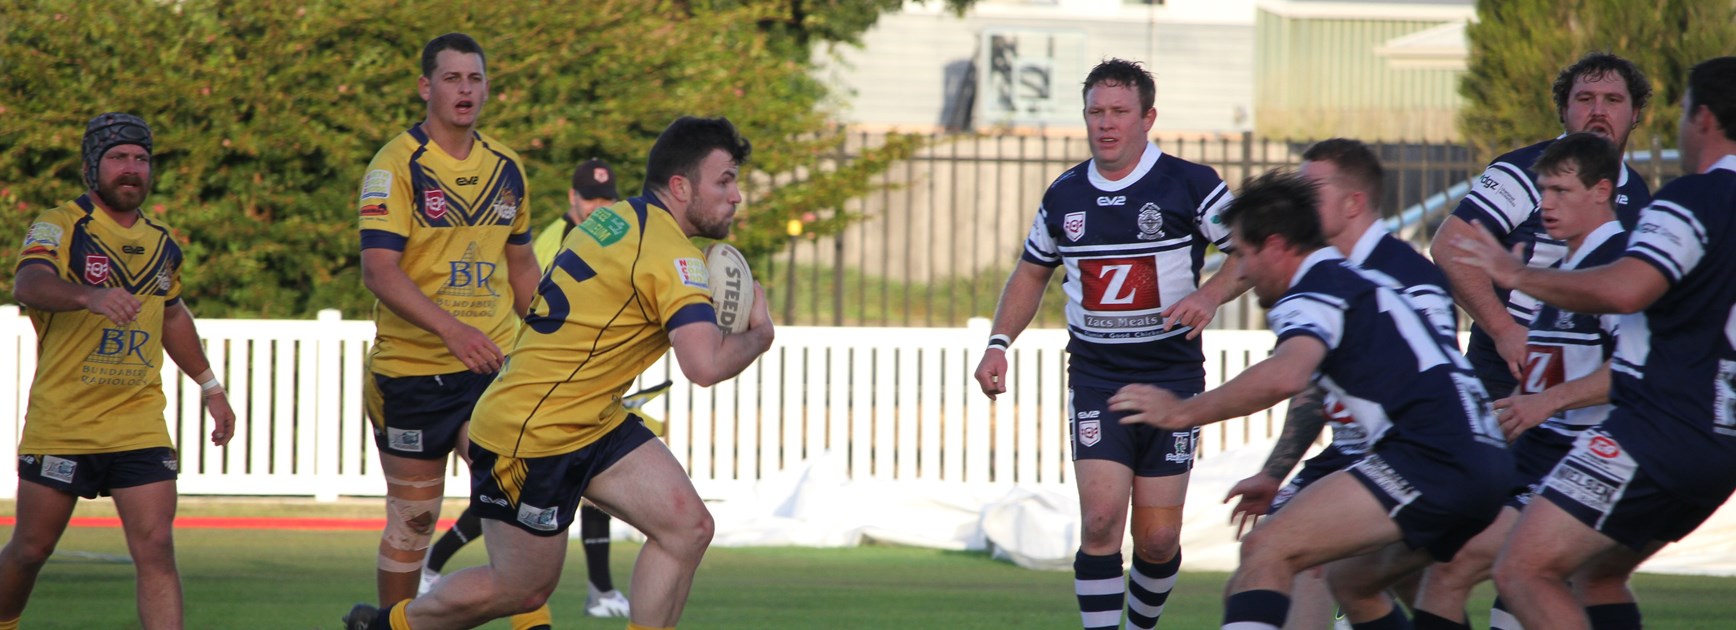 Bundaberg Round 4 preview: Plenty of talent in the mix